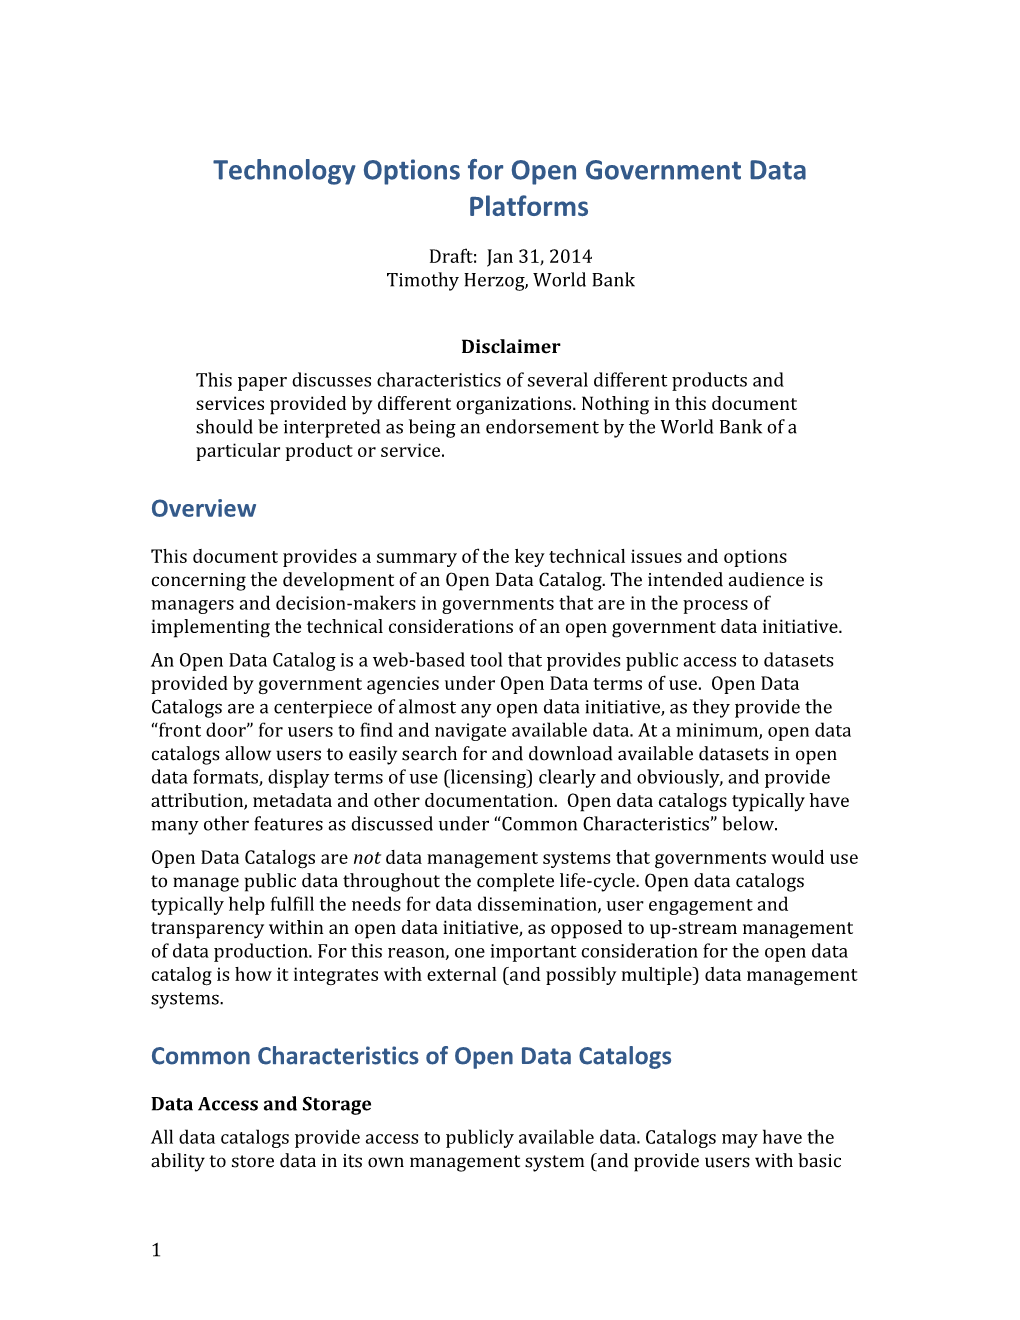 Technology Options for Open Government Data Platforms